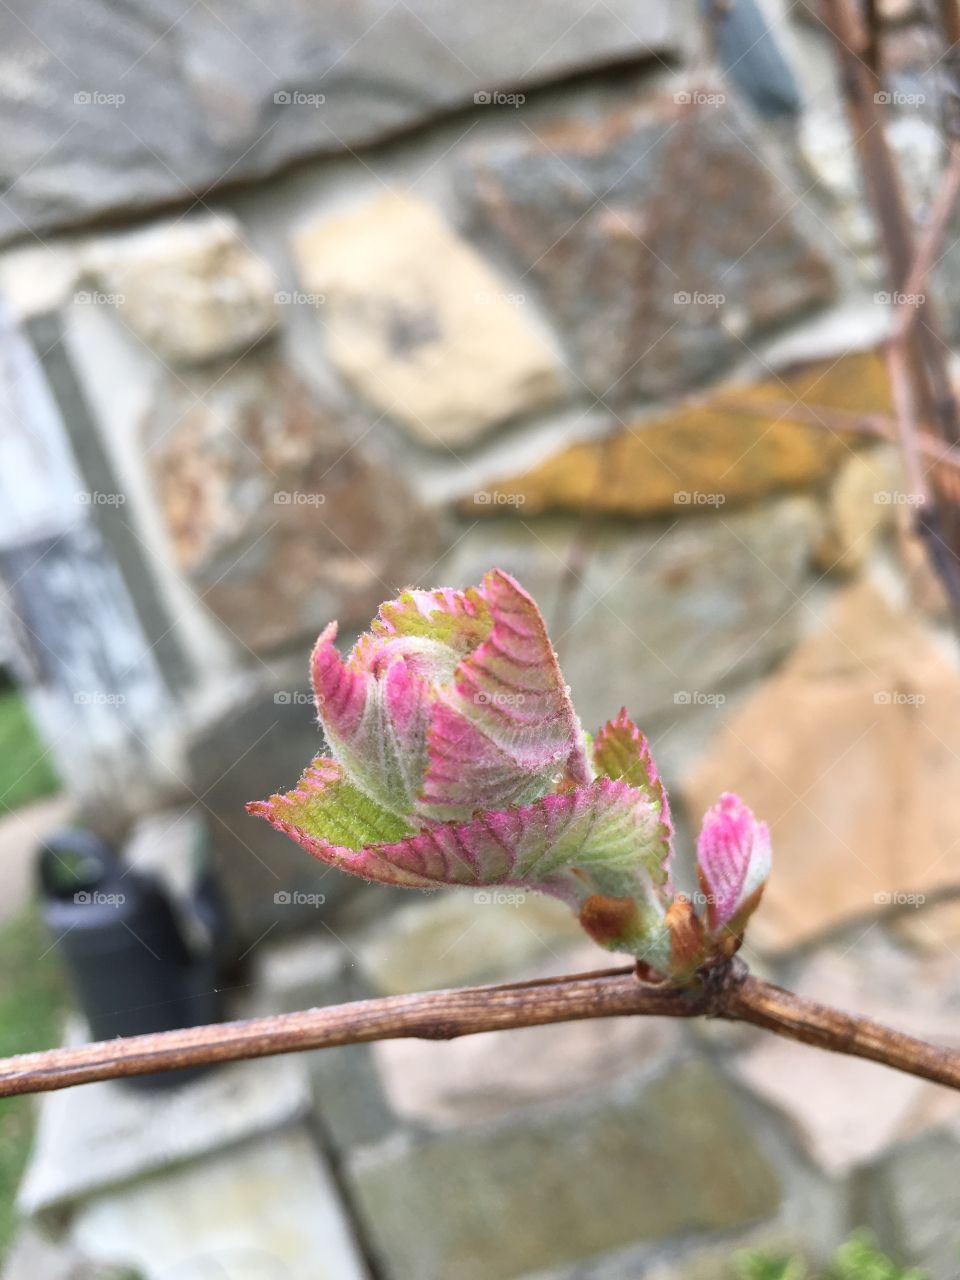 Grape leaves beginning to emerge from buds in spring against a stonewall background.